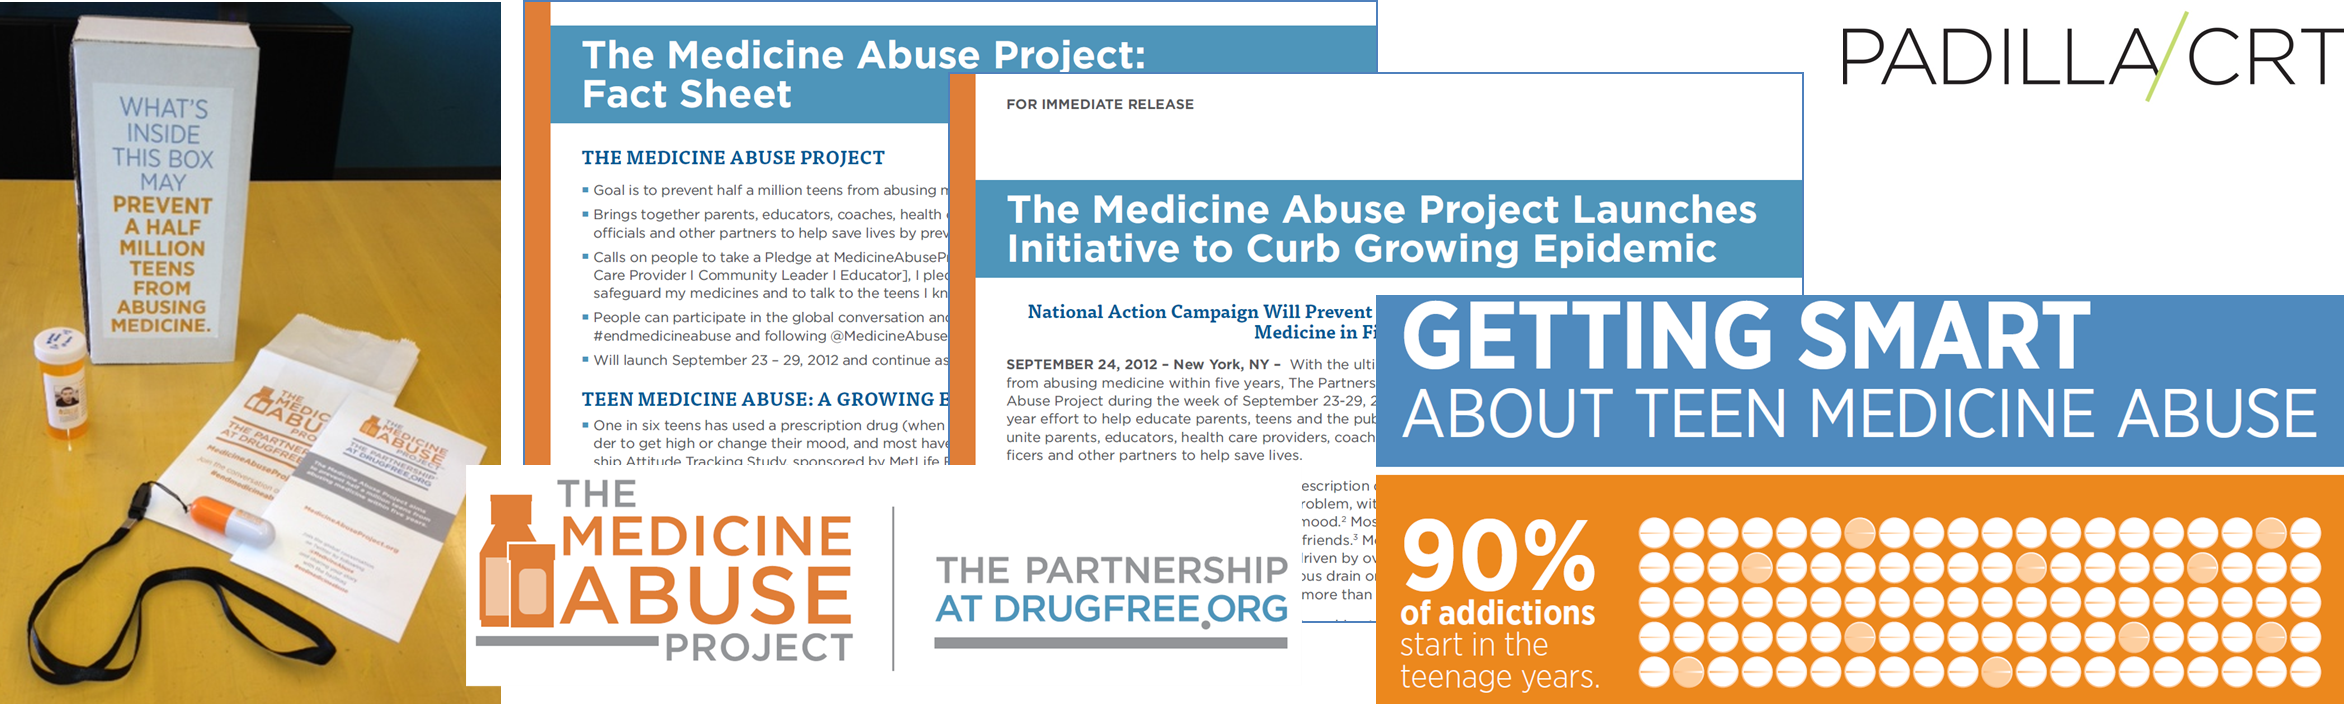 The Medicine Abuse Project: Preventing Half a Million Teens from Abusing Medicine by 2017- Logo